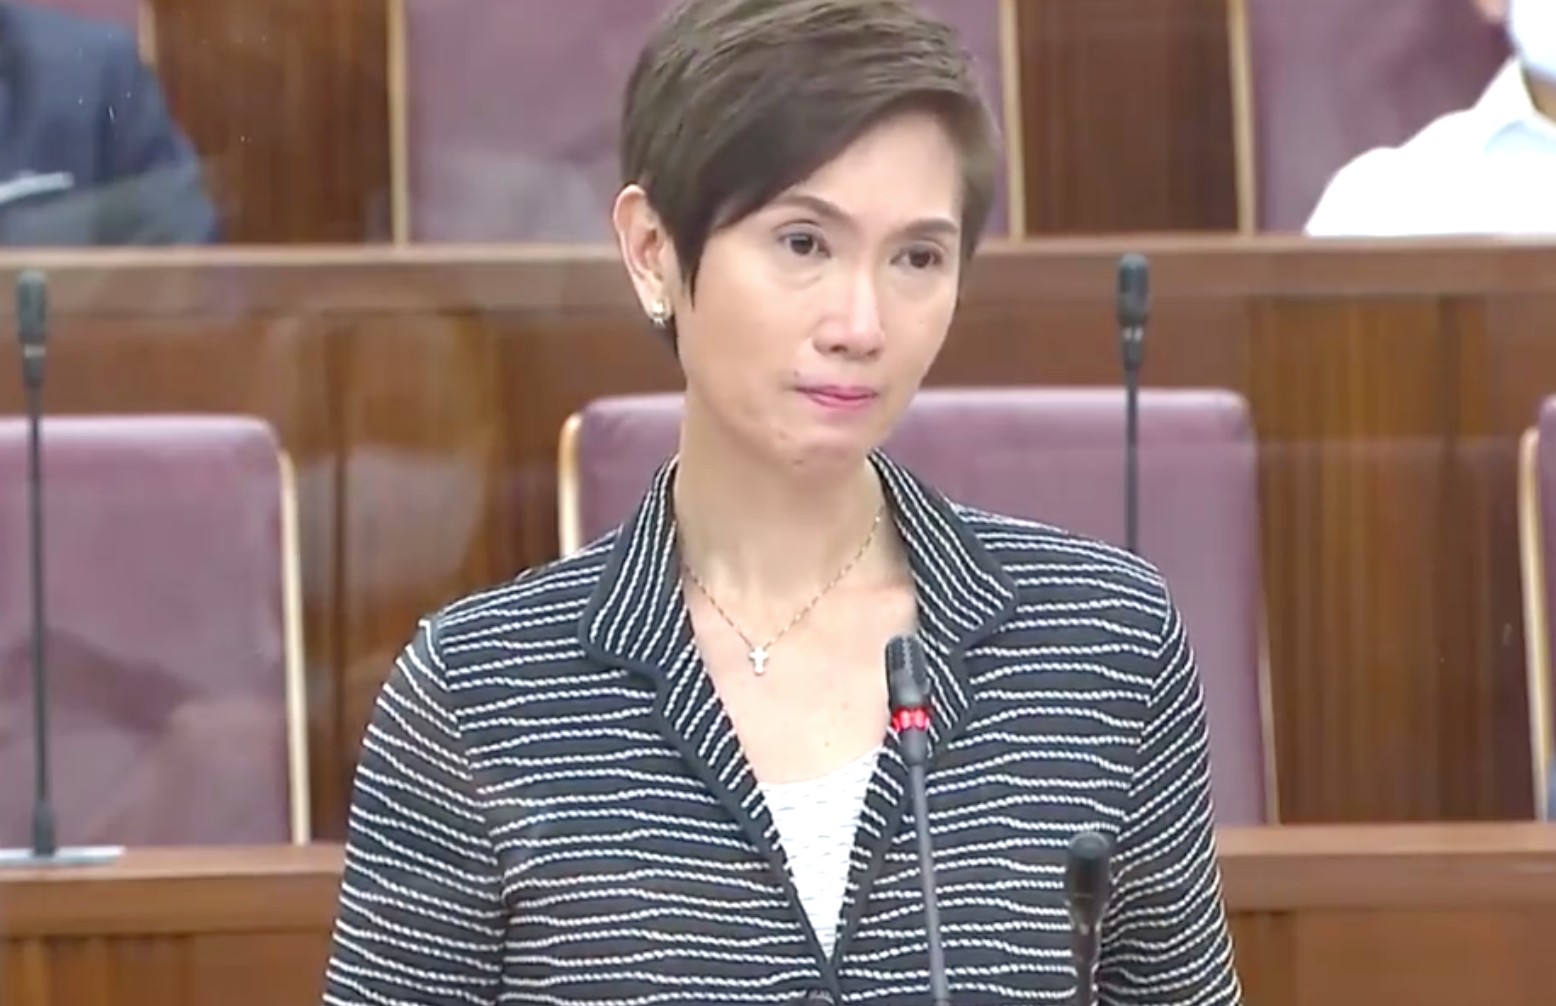 Manpower Minister Josephine Teo in Parliament. Image: All Singapore Stuff/Facebook